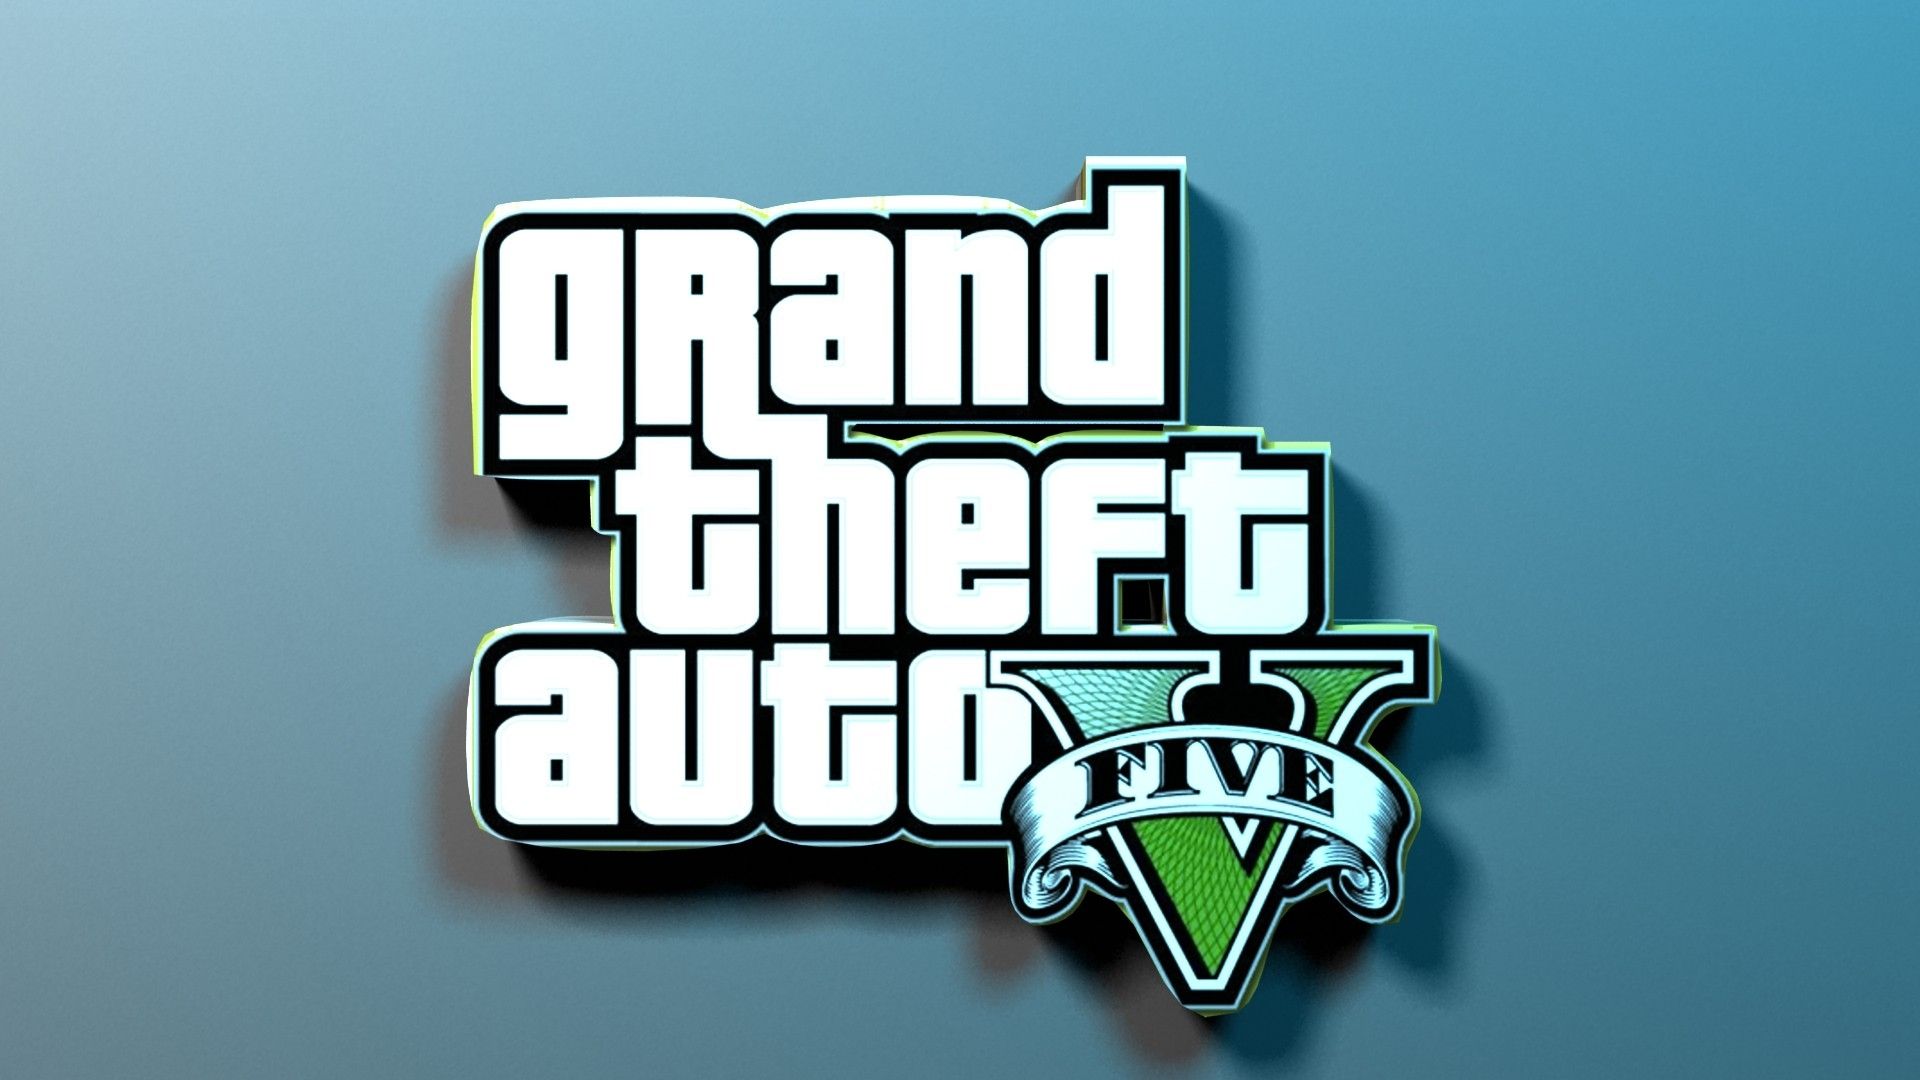 Download Wallpaper 1920x1080 Gta, Grand theft auto 5, Game, Shadow